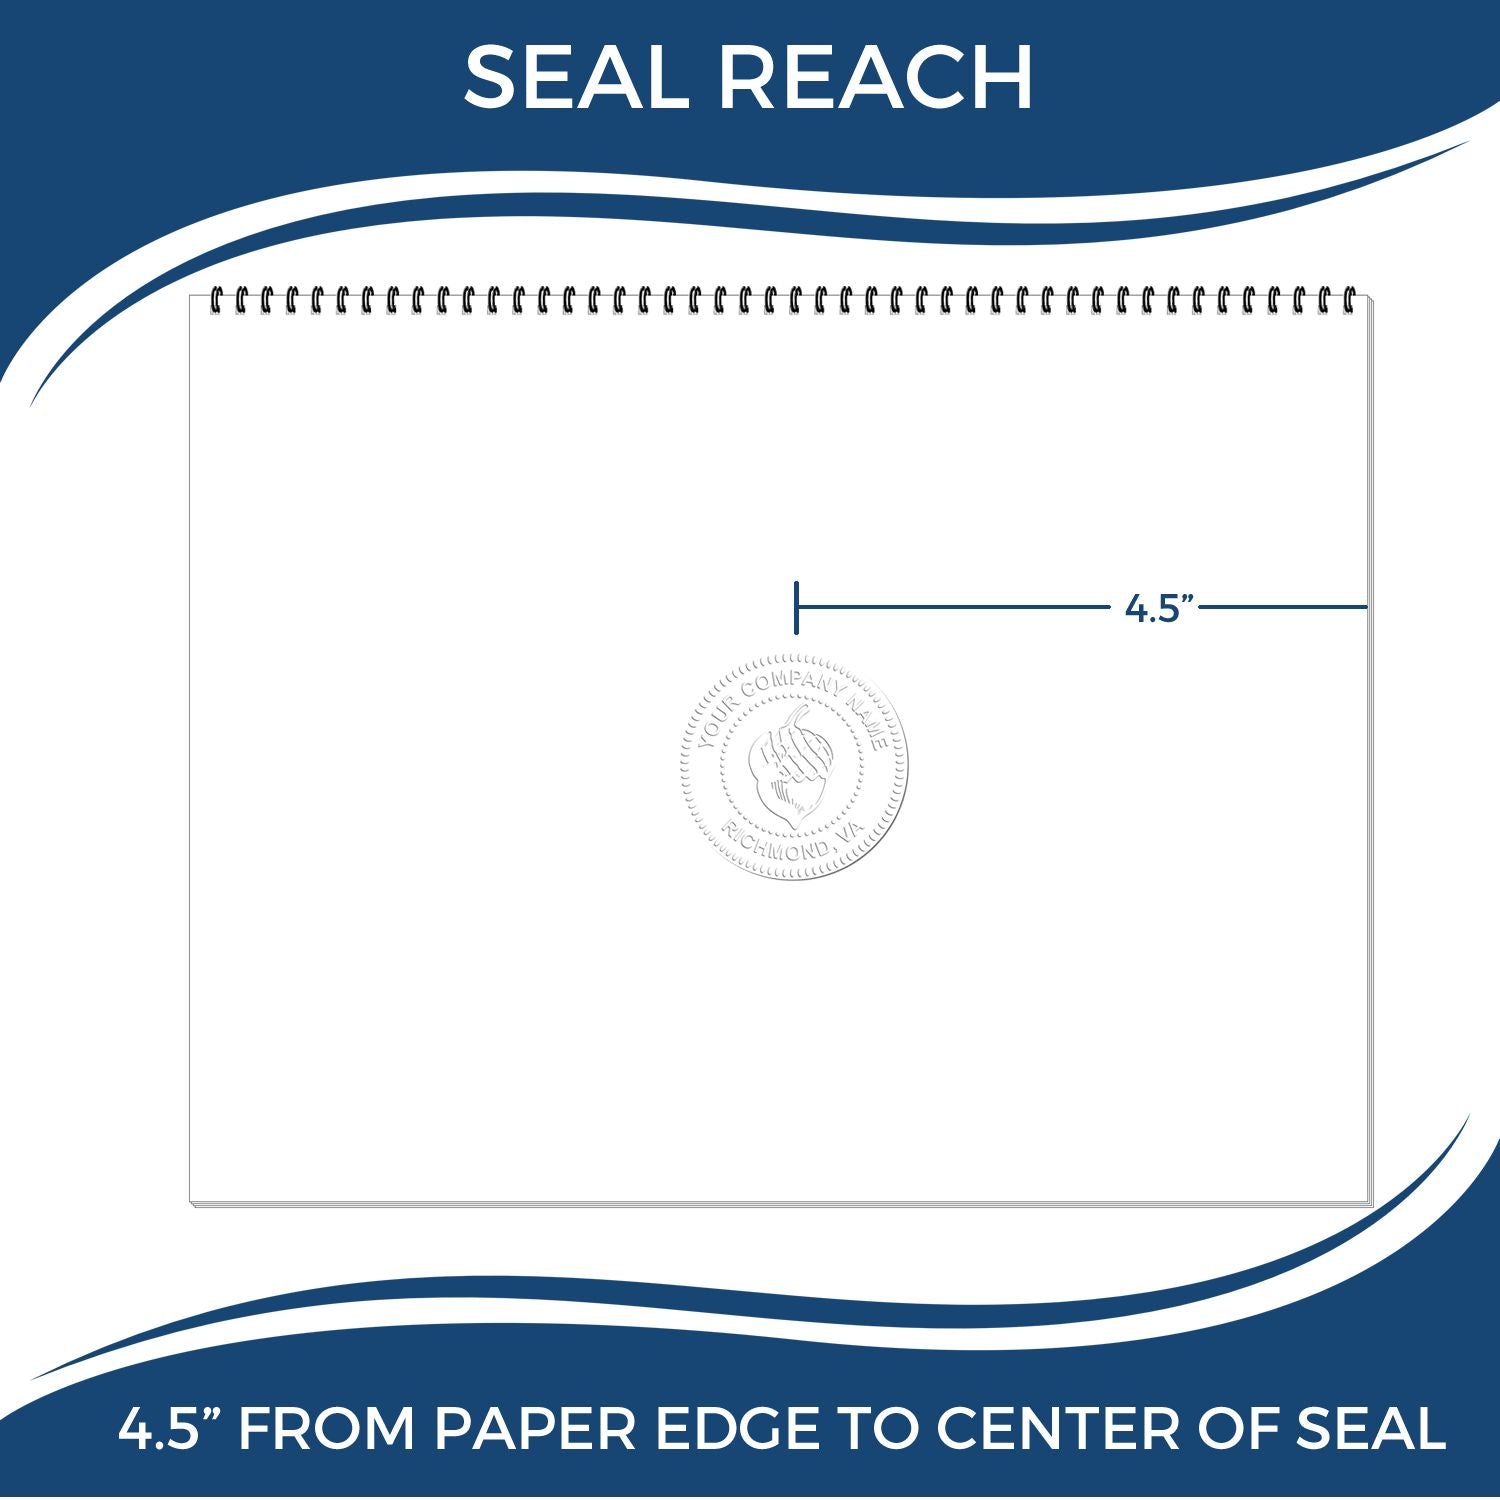 An infographic showing the seal reach which is represented by a ruler and a miniature seal image of the State of District of Columbia Extended Long Reach Geologist Seal